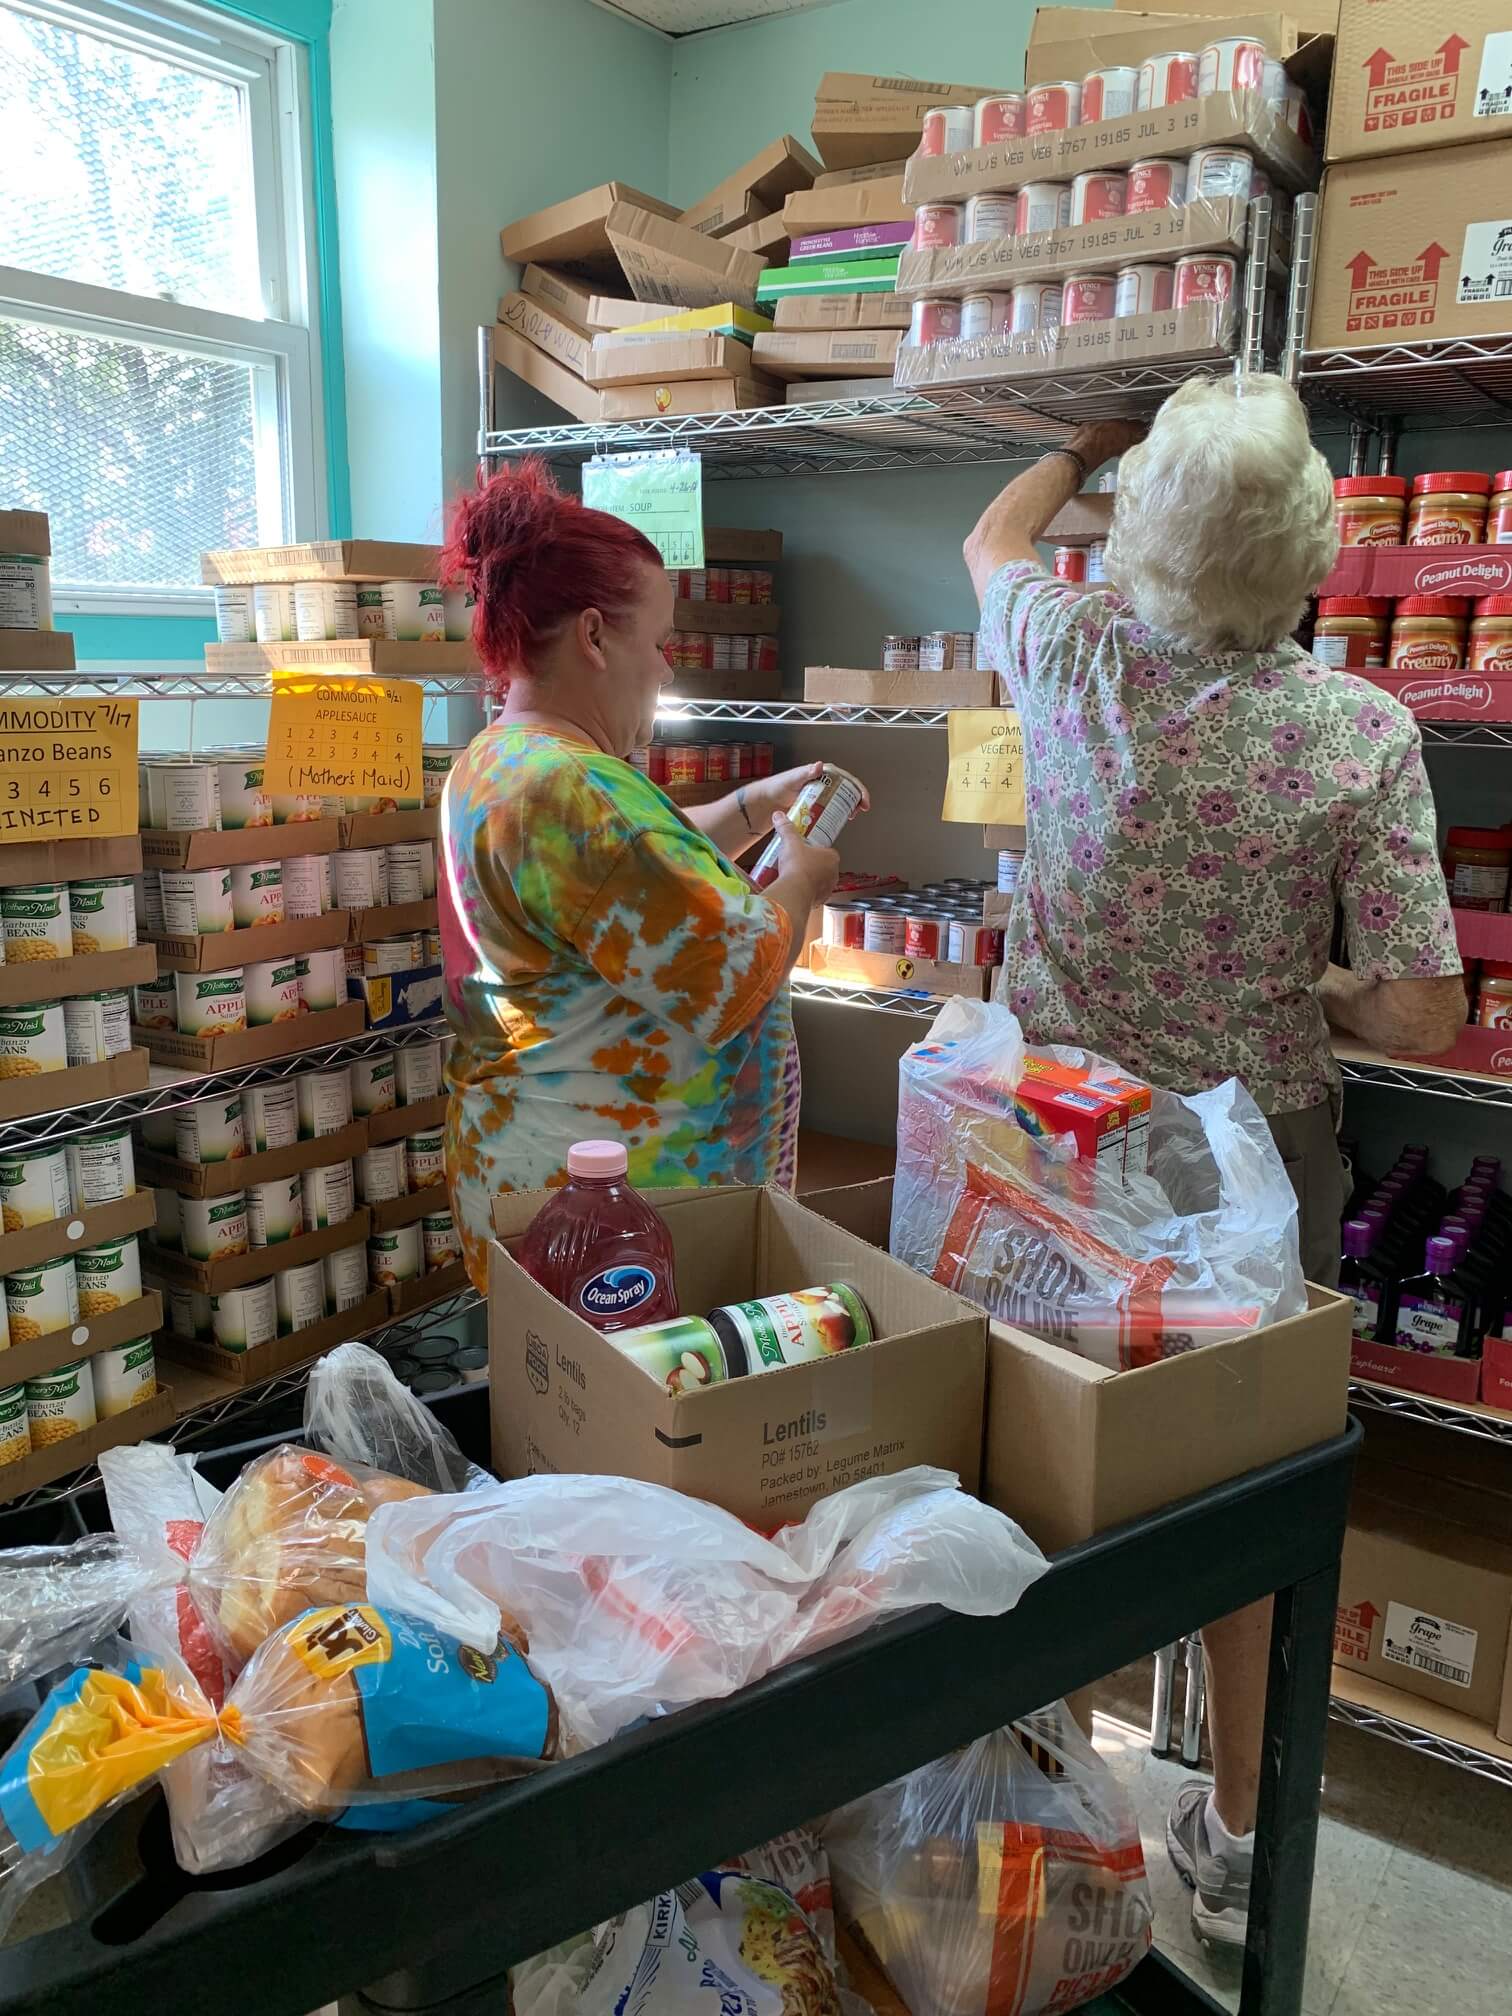 Stocking the food pantry store